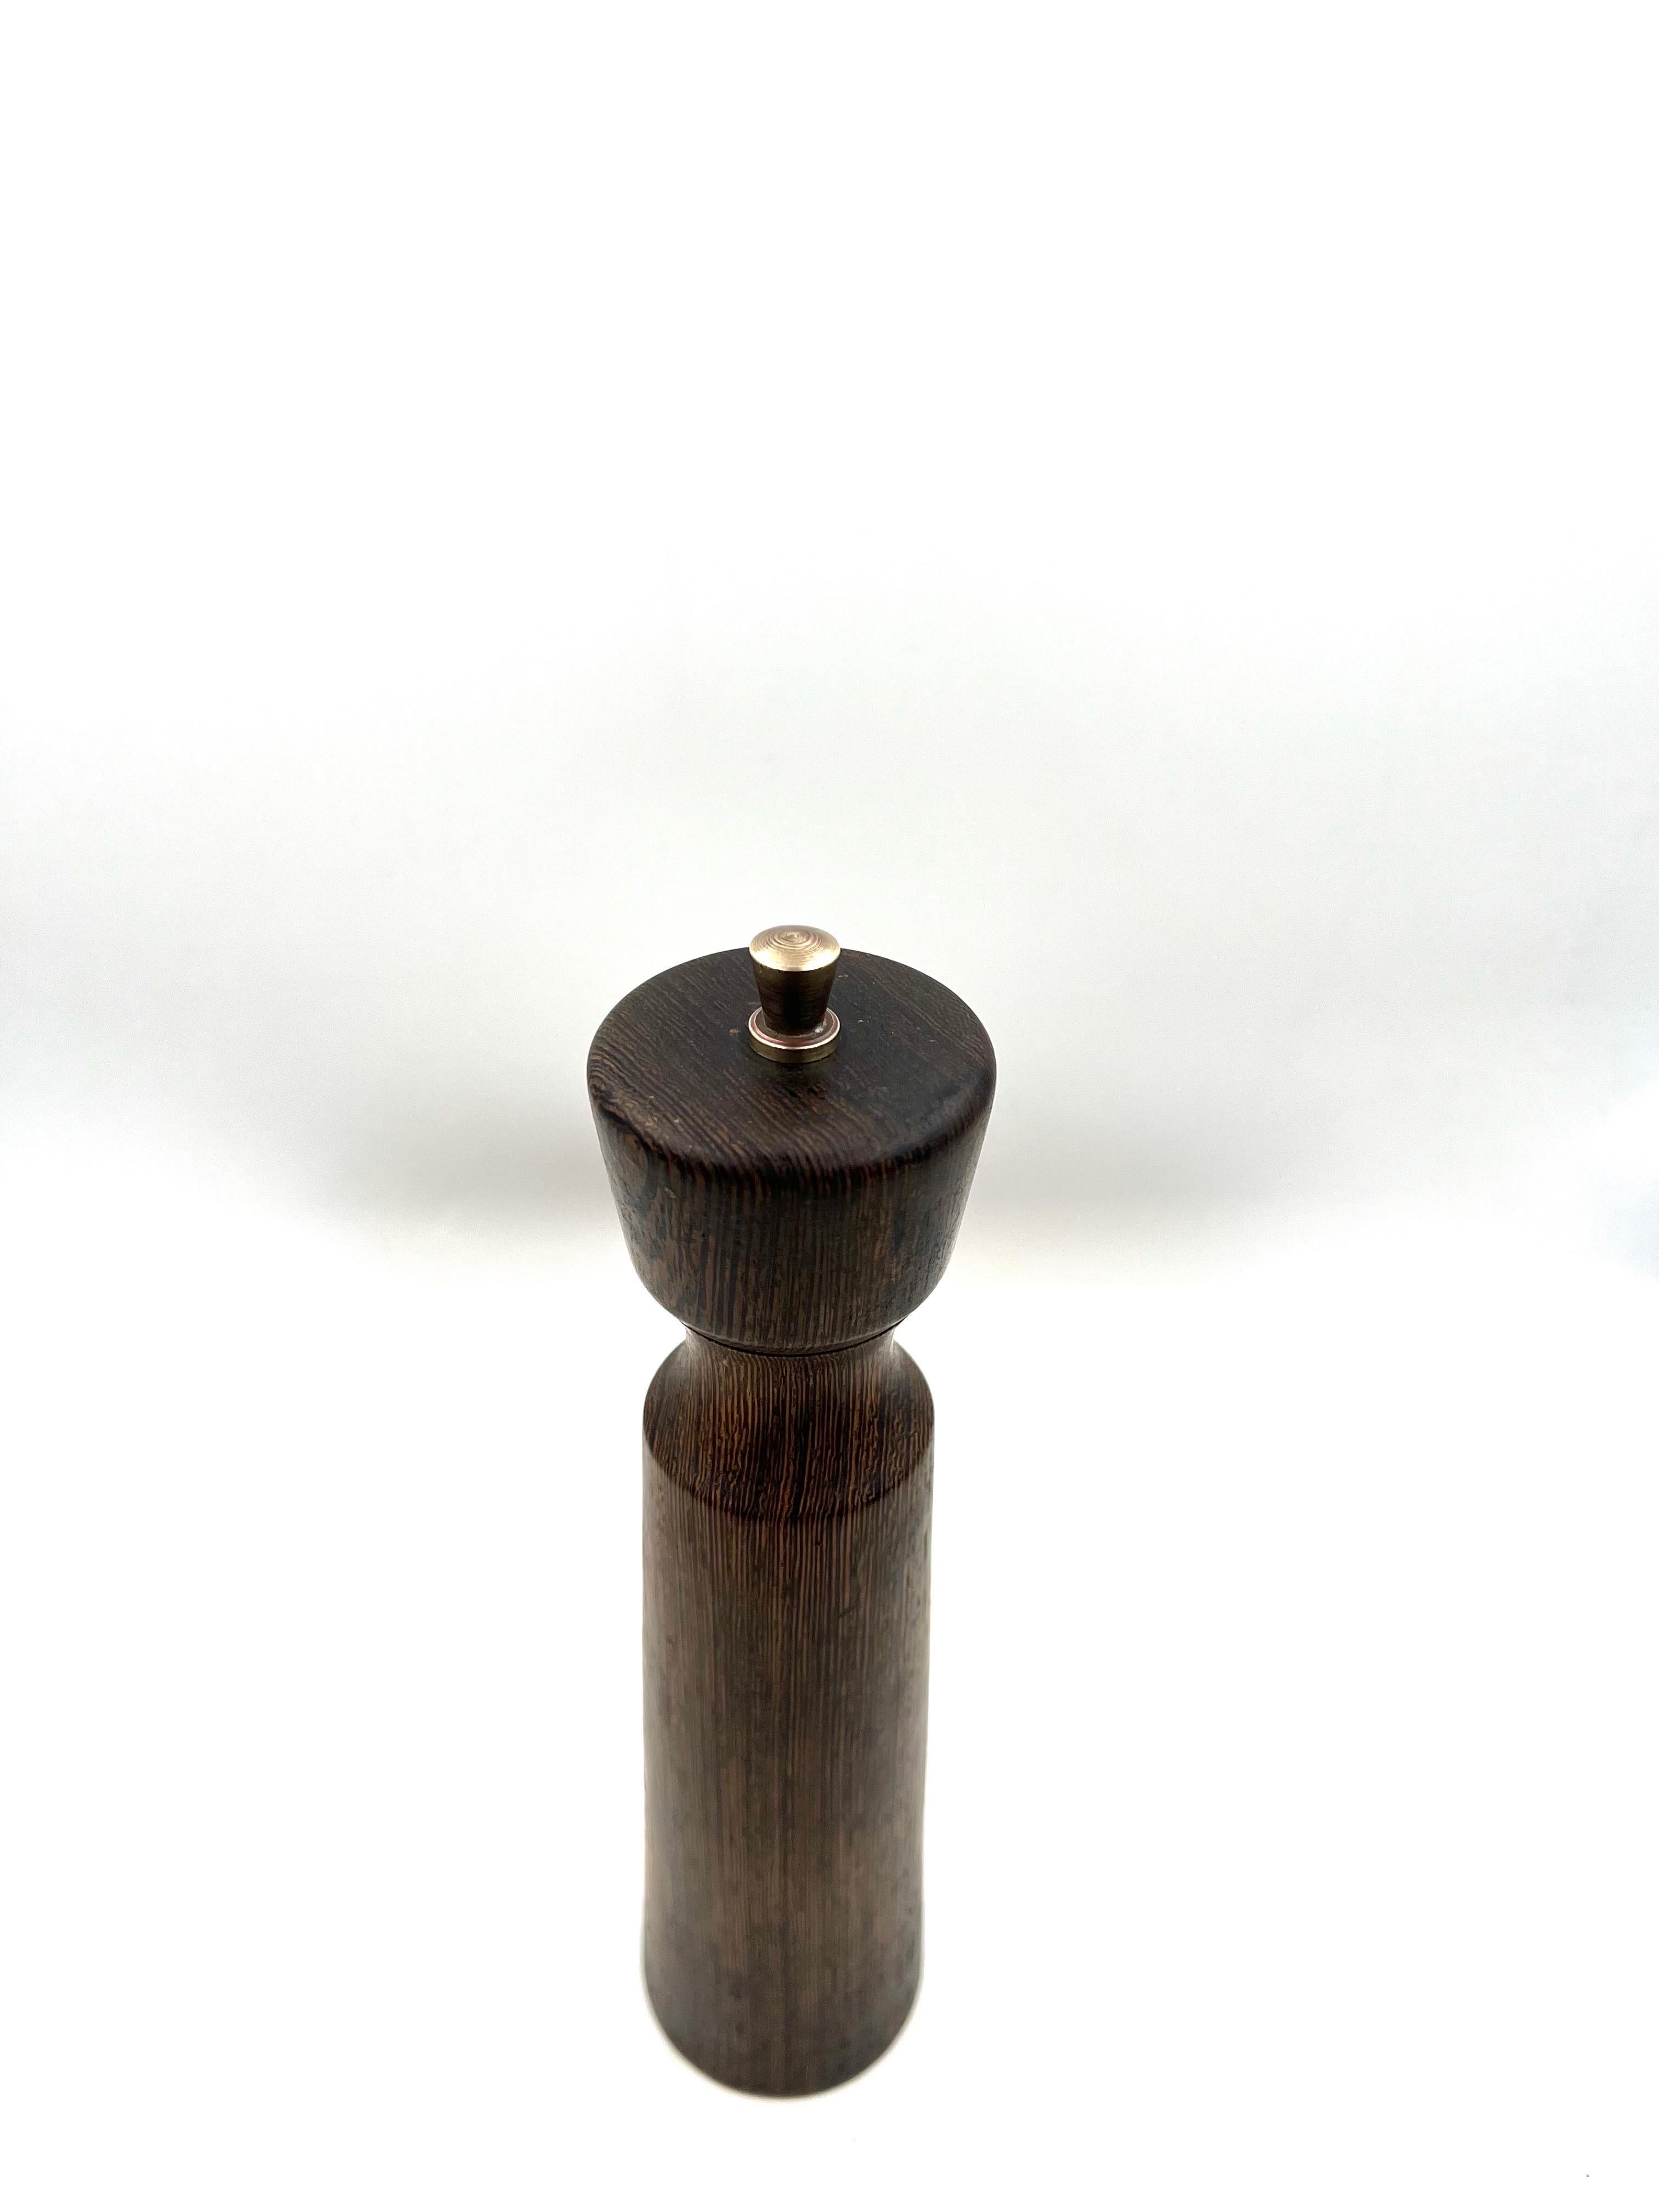 Danish Modern Rare Pepper Shaker by BR Denmark in Wenge Wood In Excellent Condition For Sale In San Diego, CA